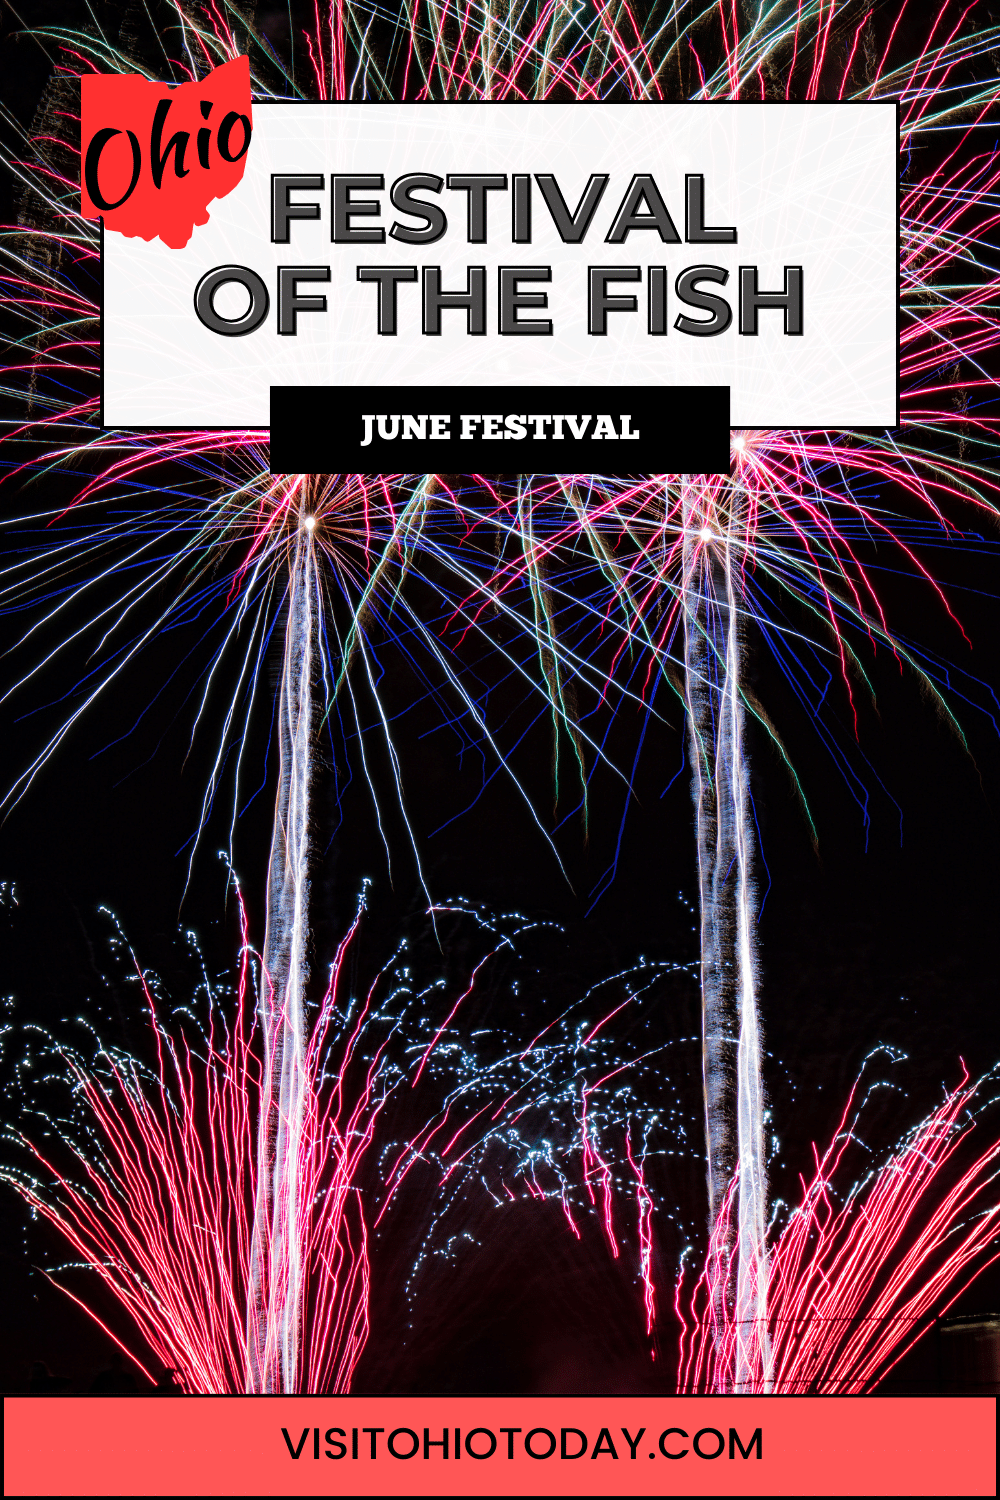 Festival of the Fish is an annual festival on the waterfront in Vermilion that takes place on Father’s Day weekend.